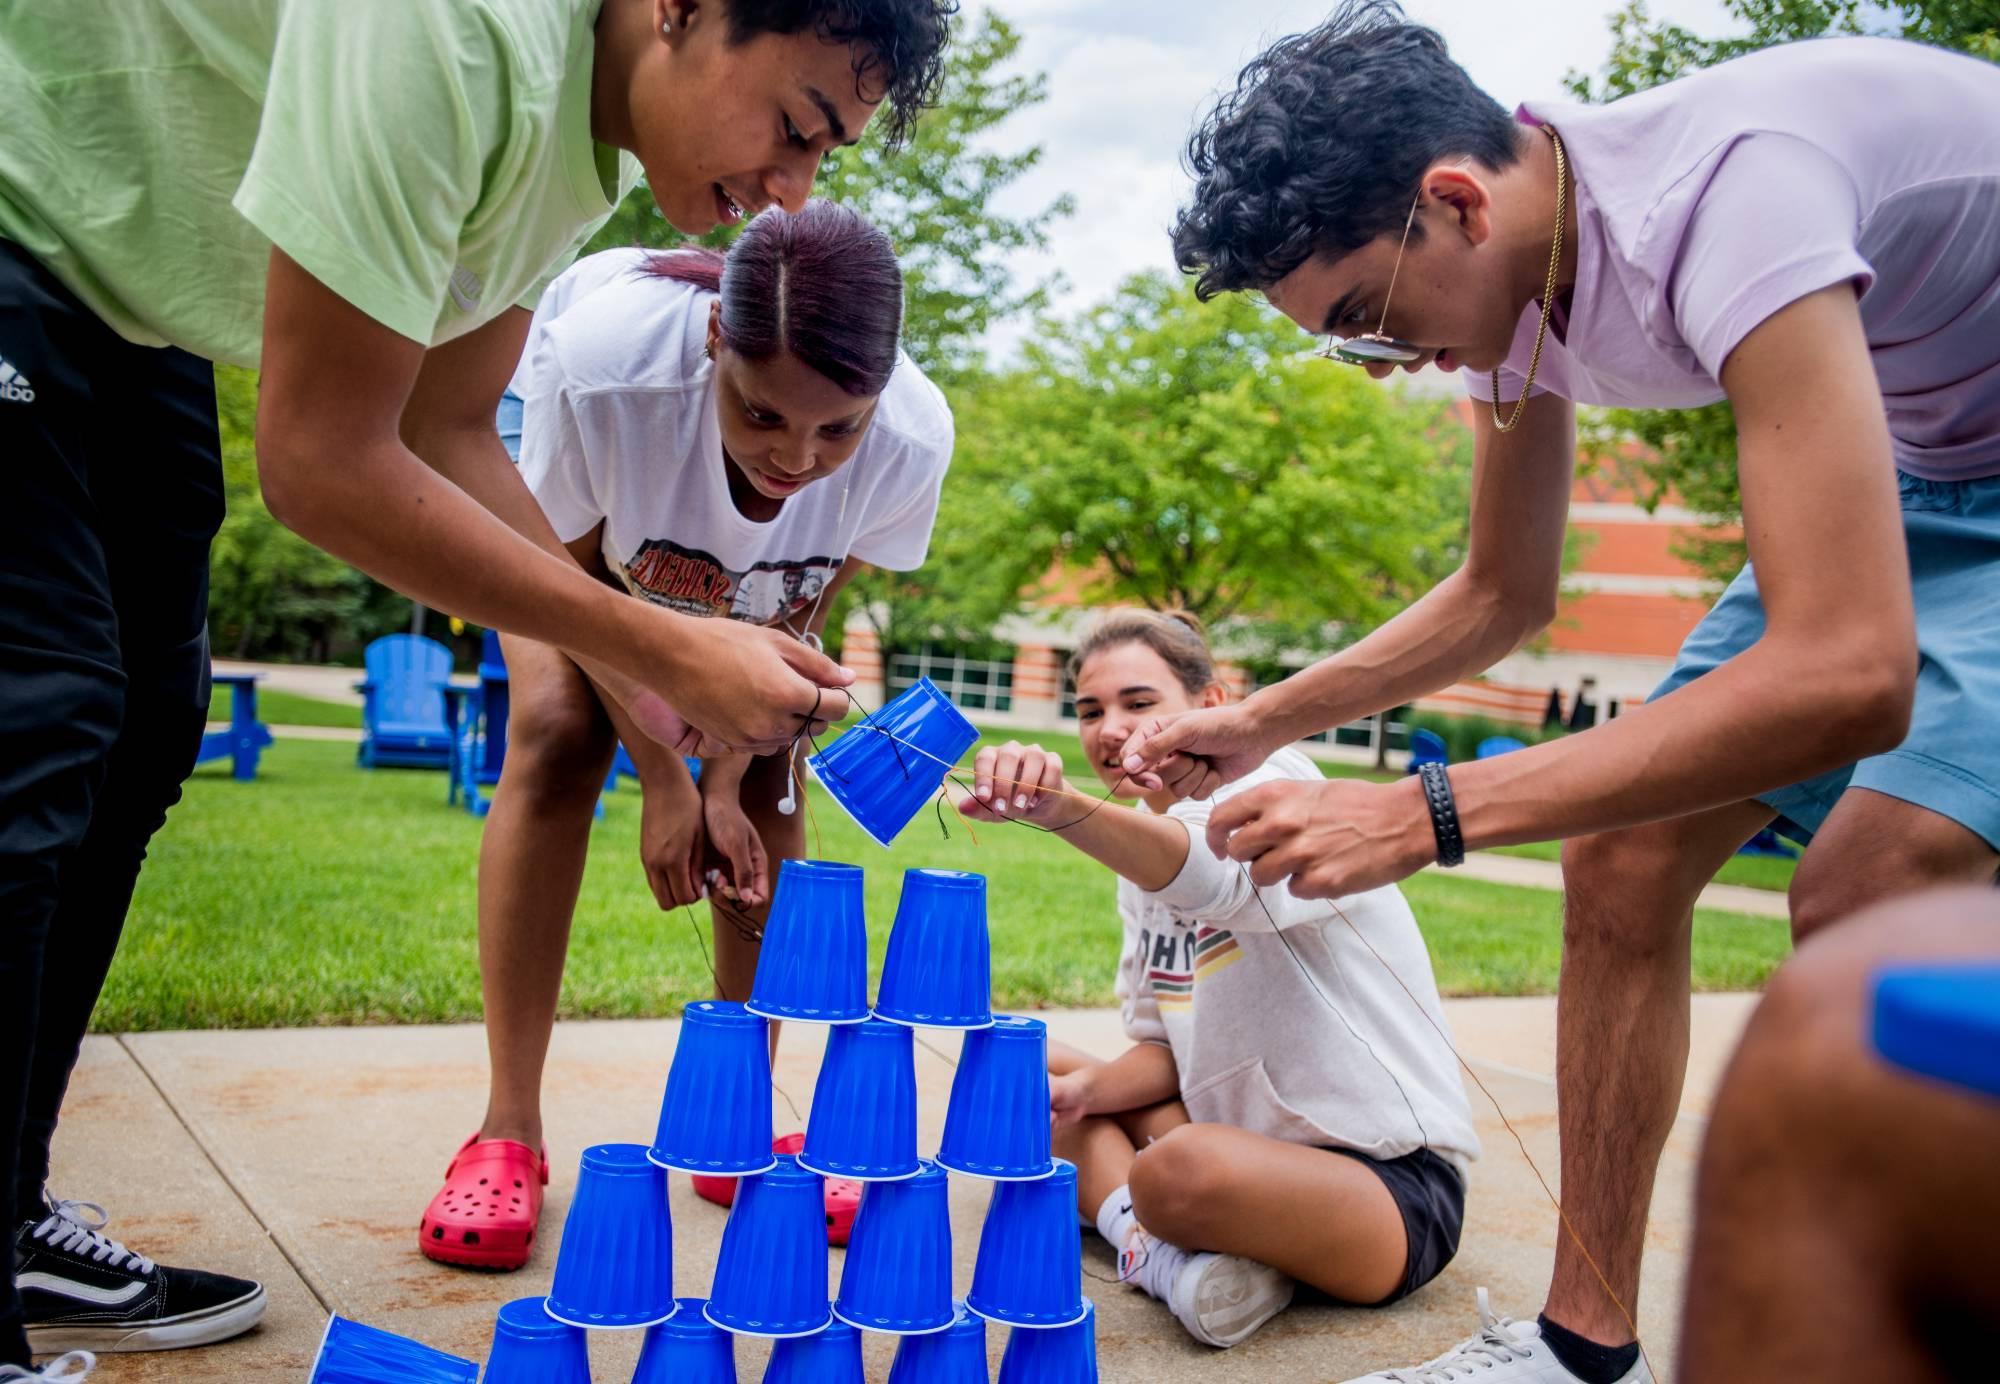 Students stacking cups as a a group